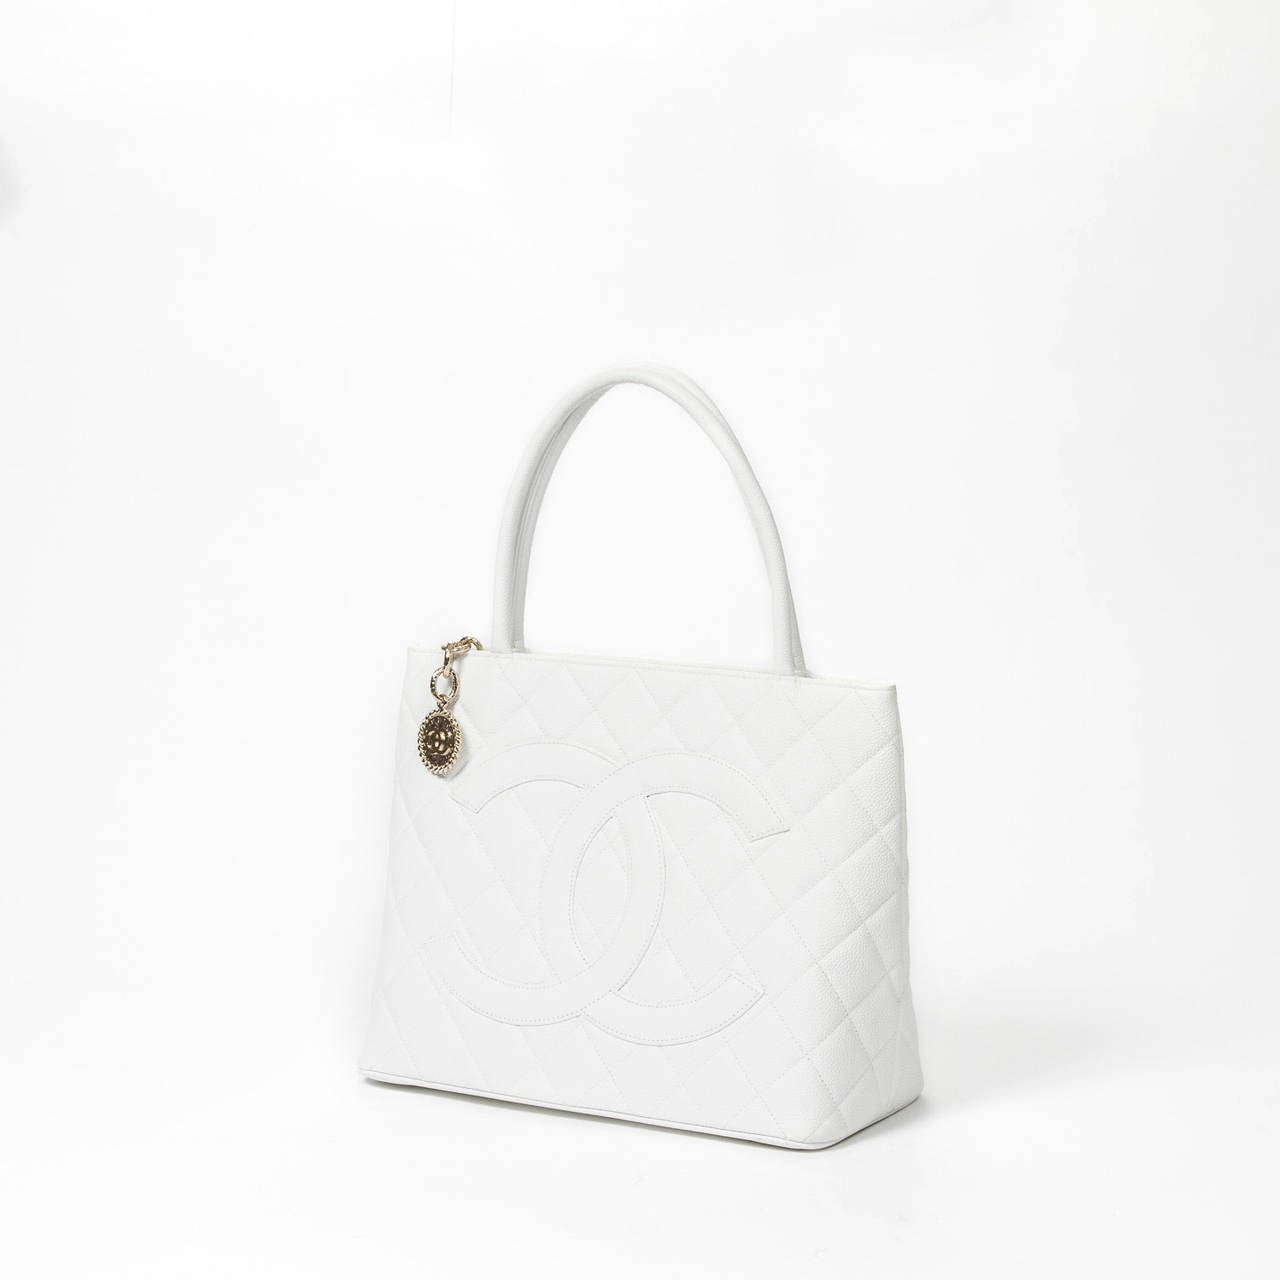 Médaillon in white grained quilted leather with back slip pocket and gold tone hardware. White leather lined interior with one slip and one zip pocket, authenticity sticker included. Model of 2002 (code : 7255325) . Box and dustbag included.